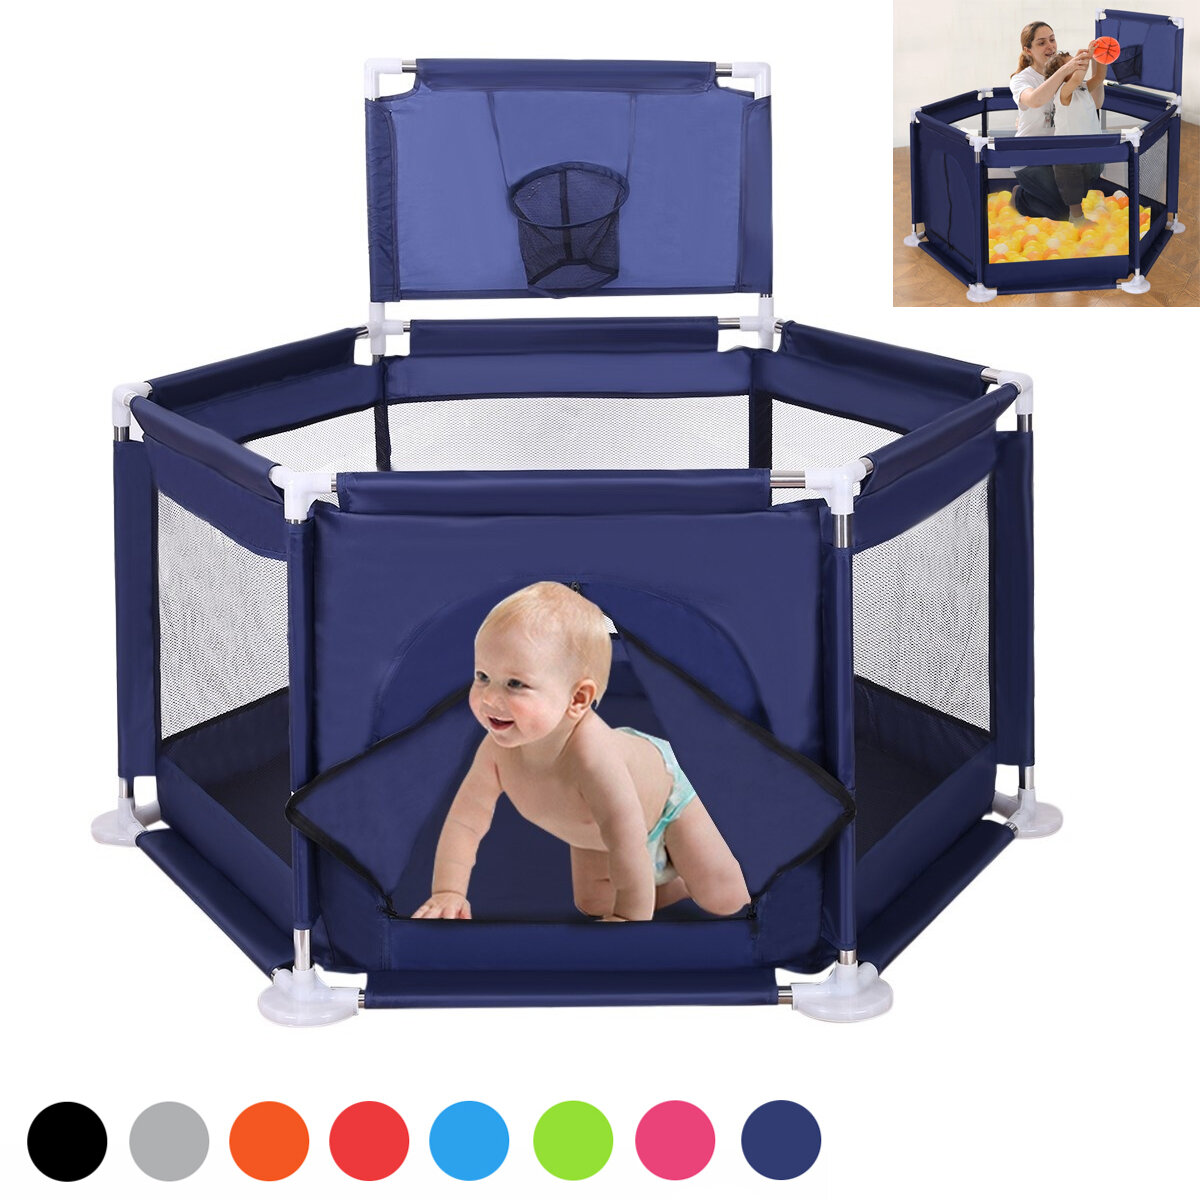 Image of 6 Sided Foldable Baby Playpen Playing House Interactive Kids Toddler Room With Safety Gate